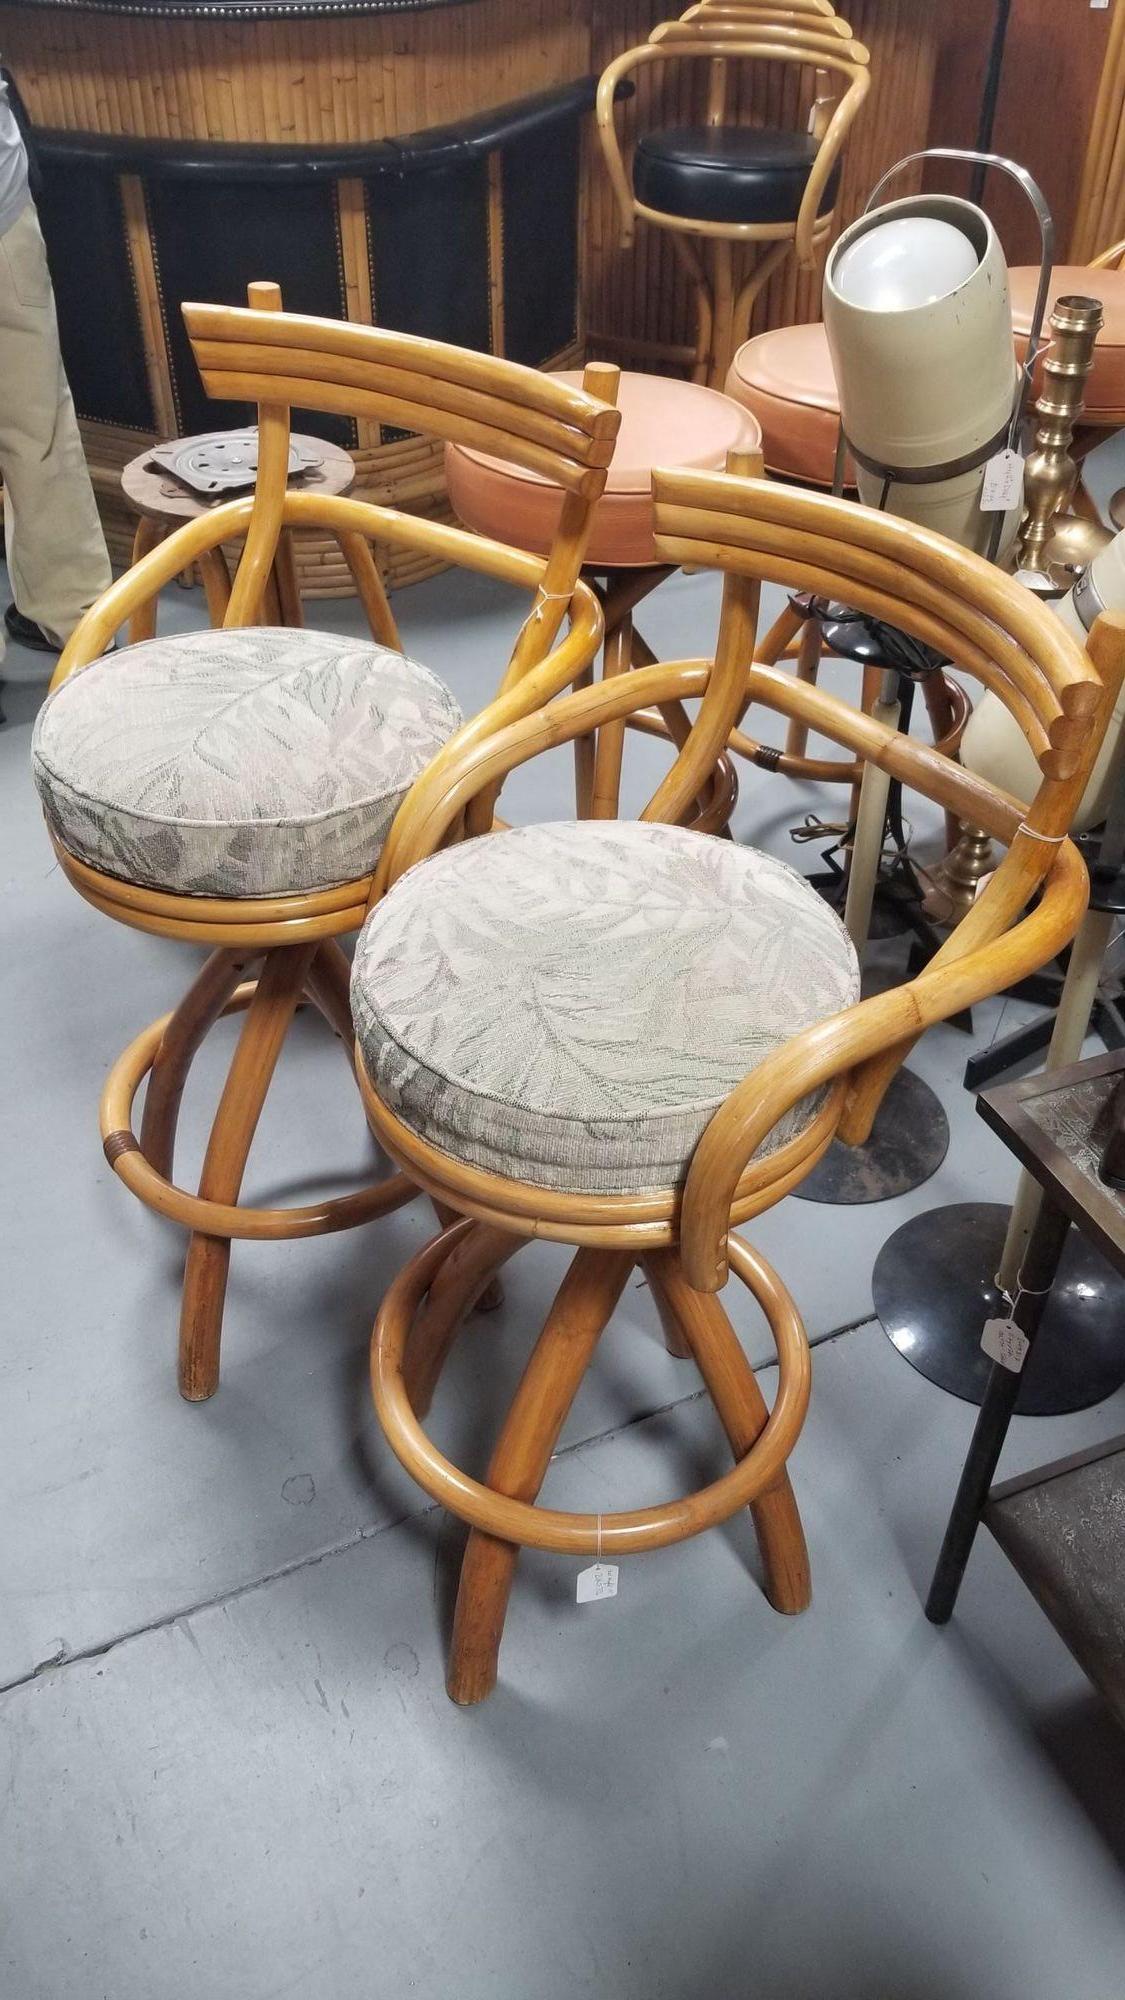 Restored rattan stacked-back pair of two barstools with neutral taupe-green colored botanical leaf fabric swivel seats.

Elevate your seating experience with these meticulously restored rattan bar stools. Featuring swivel fabric seats and a stacked